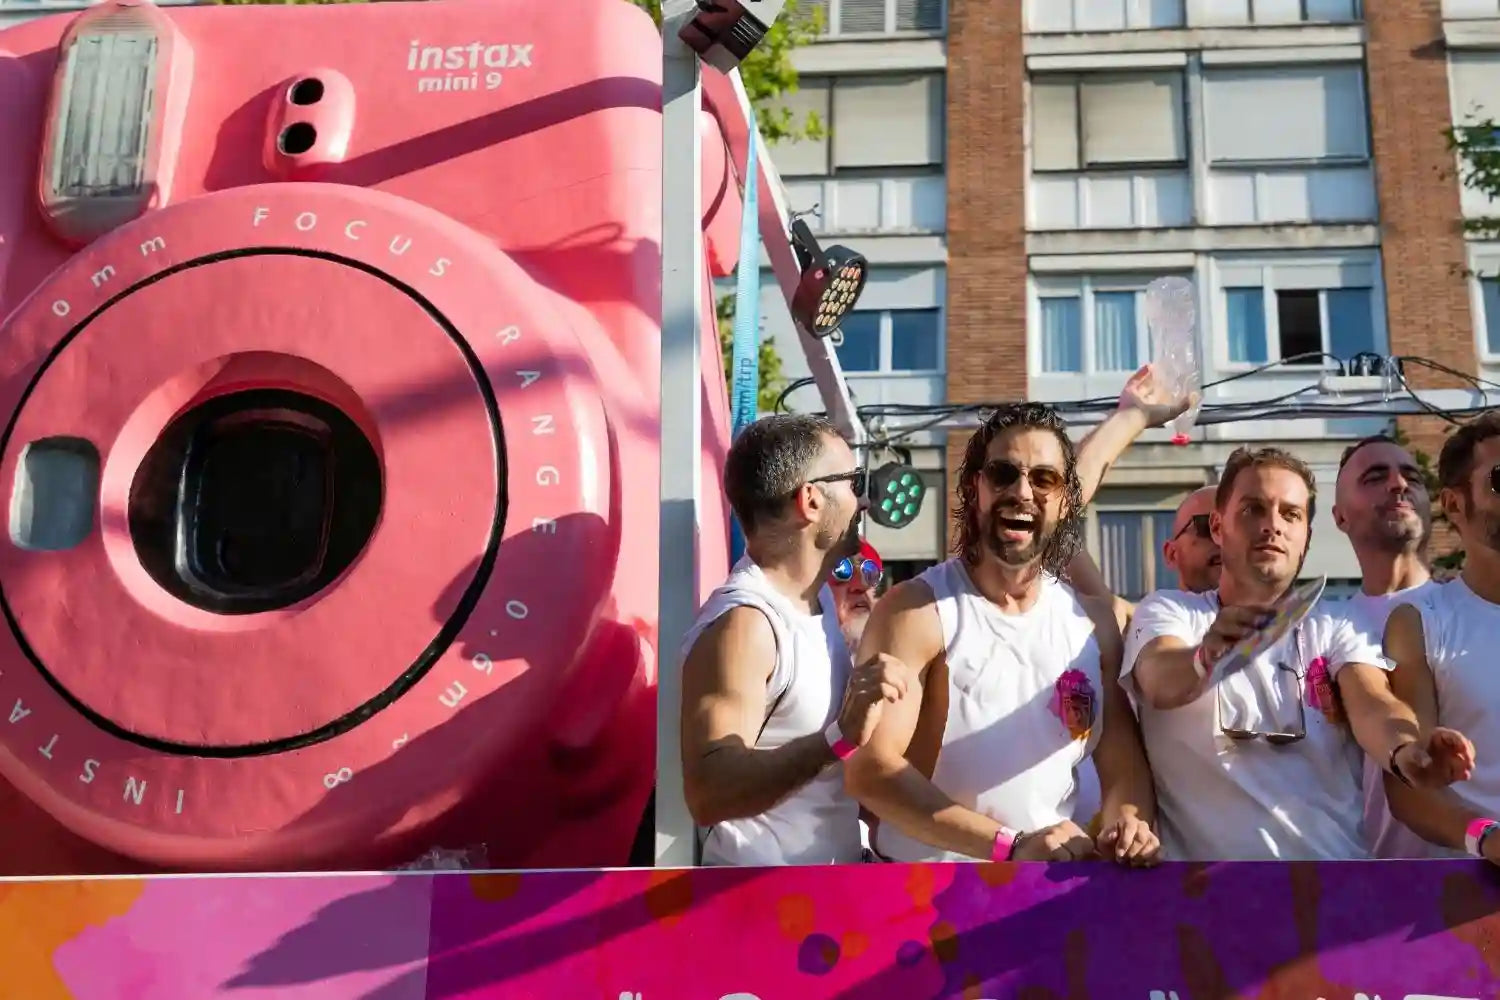 a big pink instax mini 9 and some smiling men 